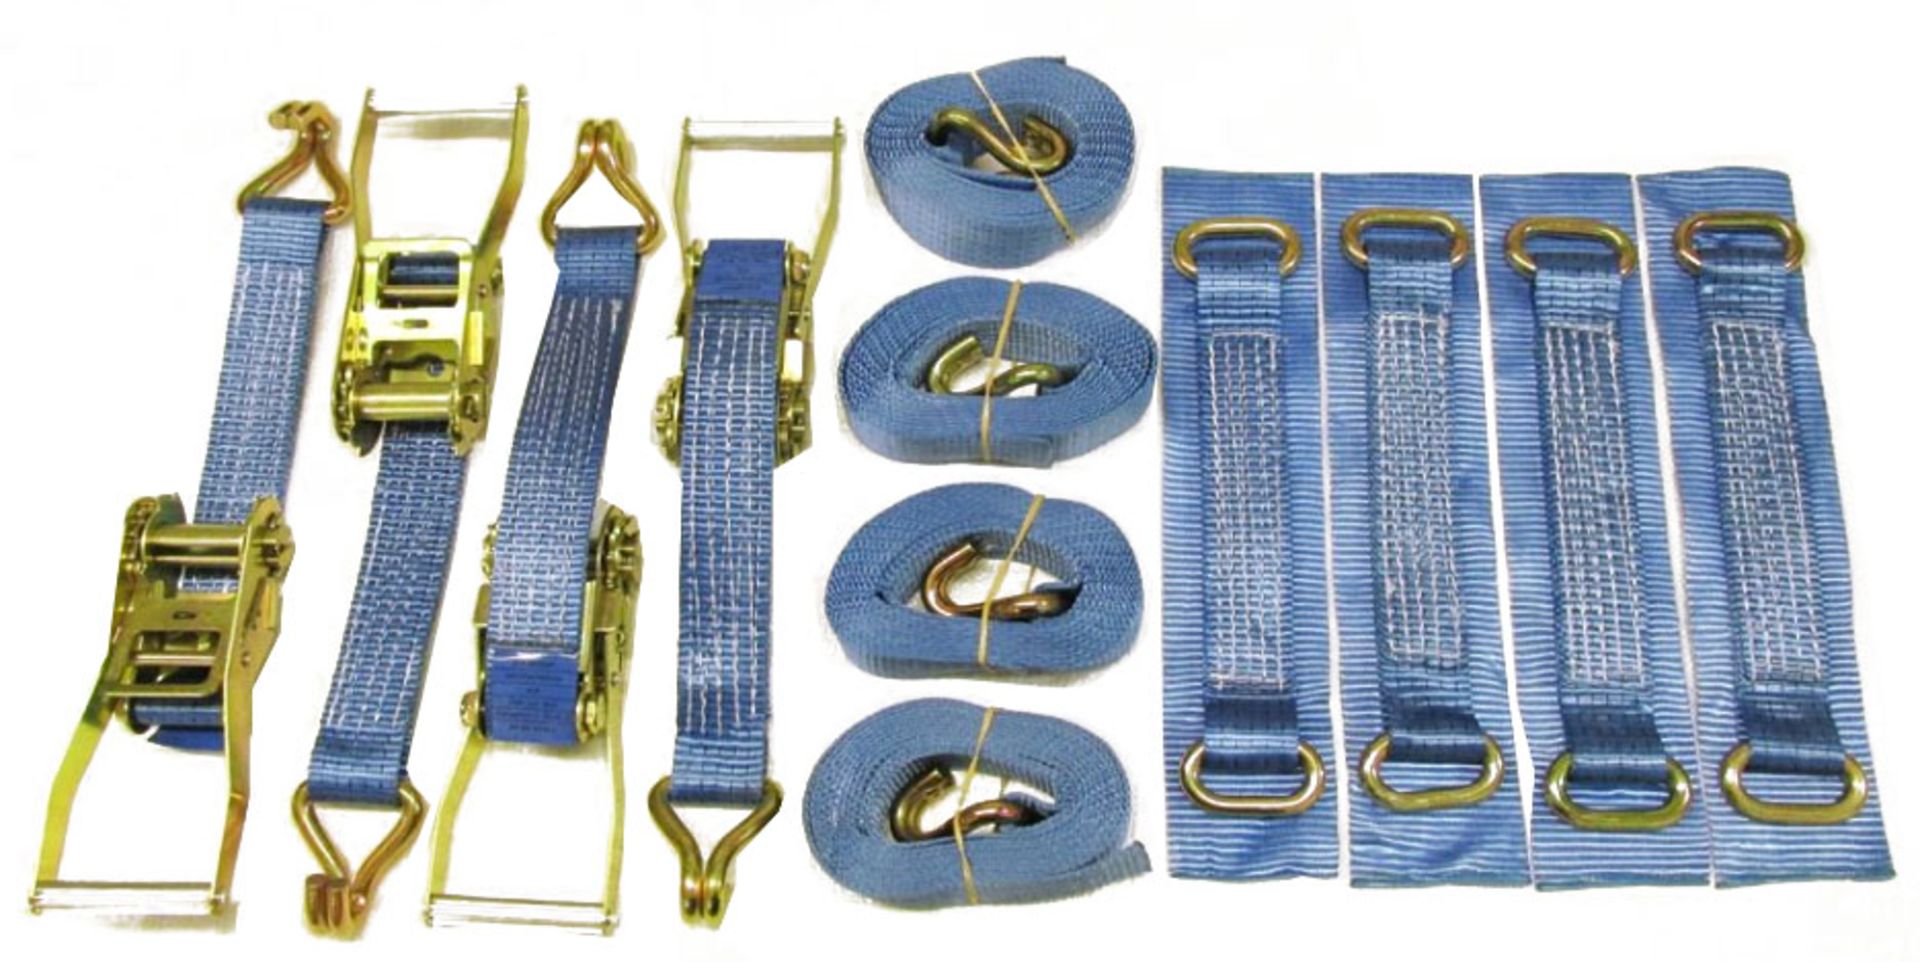 15 X PACK OF 4 - 35MM X 4 METRE RATCHET LASHINGS WITH CLAW HOOK AND 4 ROUND SLING STRAPS (RLPACK35)